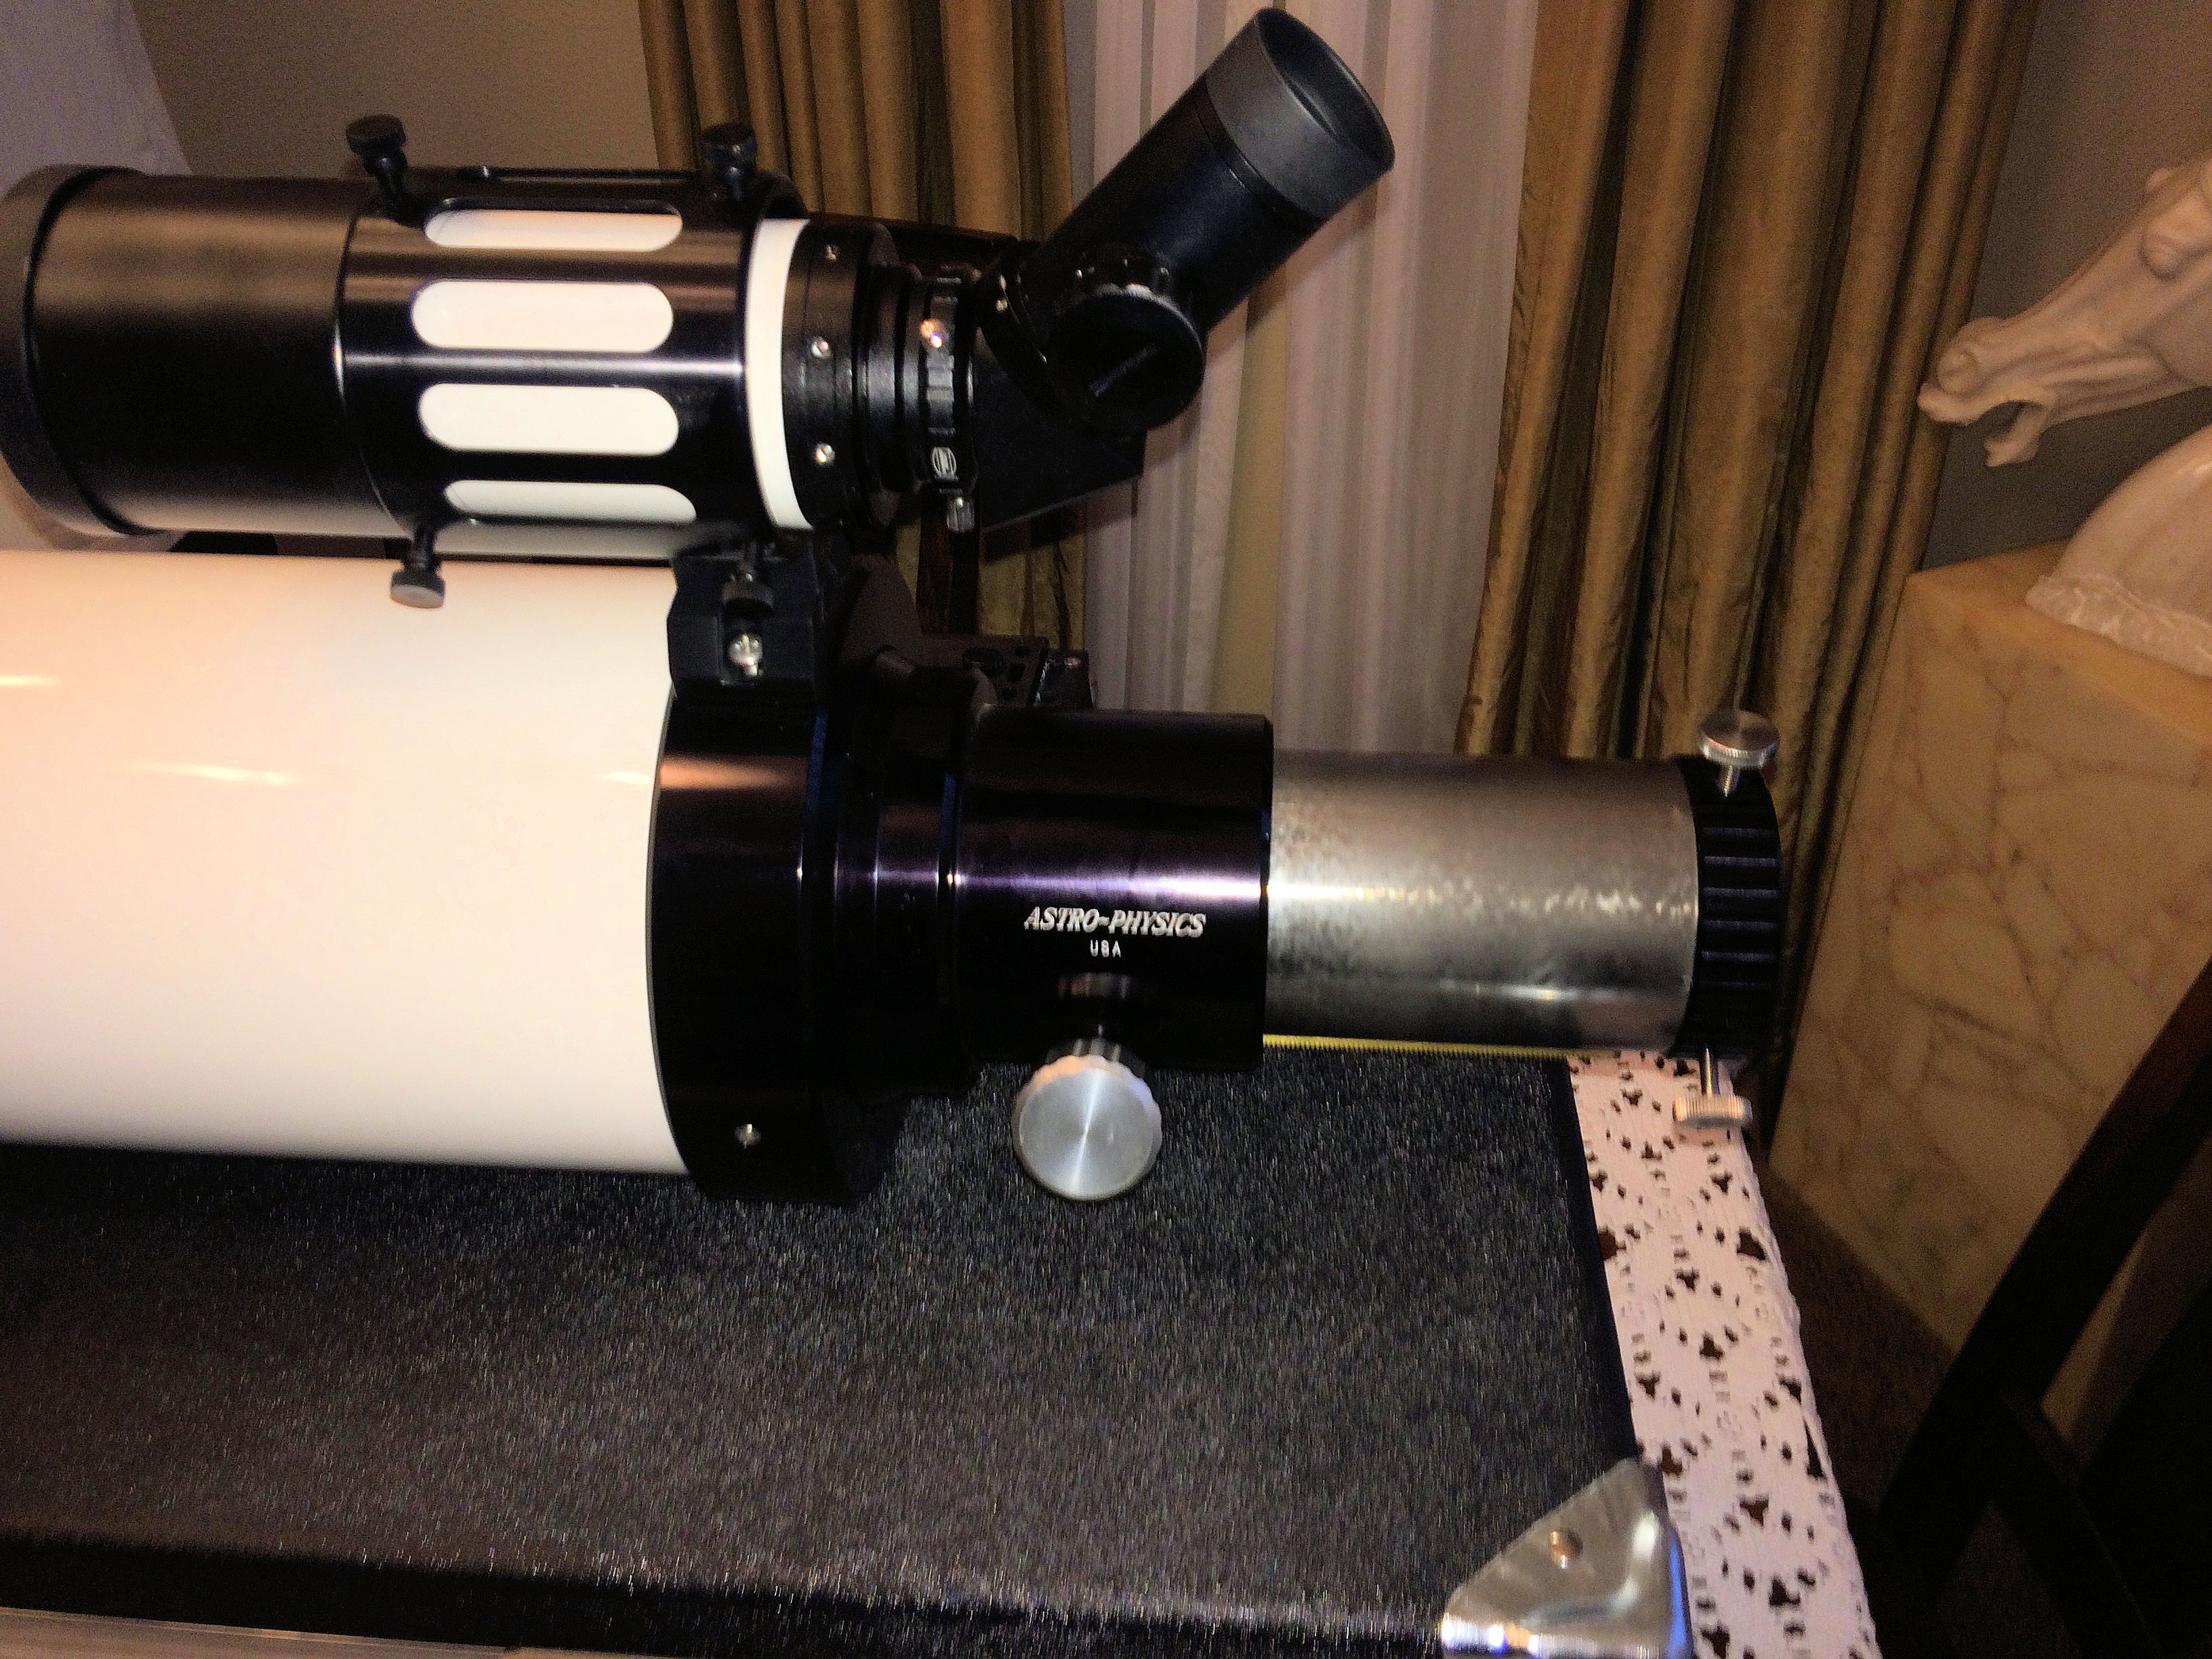 Sale Pending! Astro-Physics Starfire Air-Spaced Triplet 152mm F/9 Used Astro-physics Telescopes For Sale